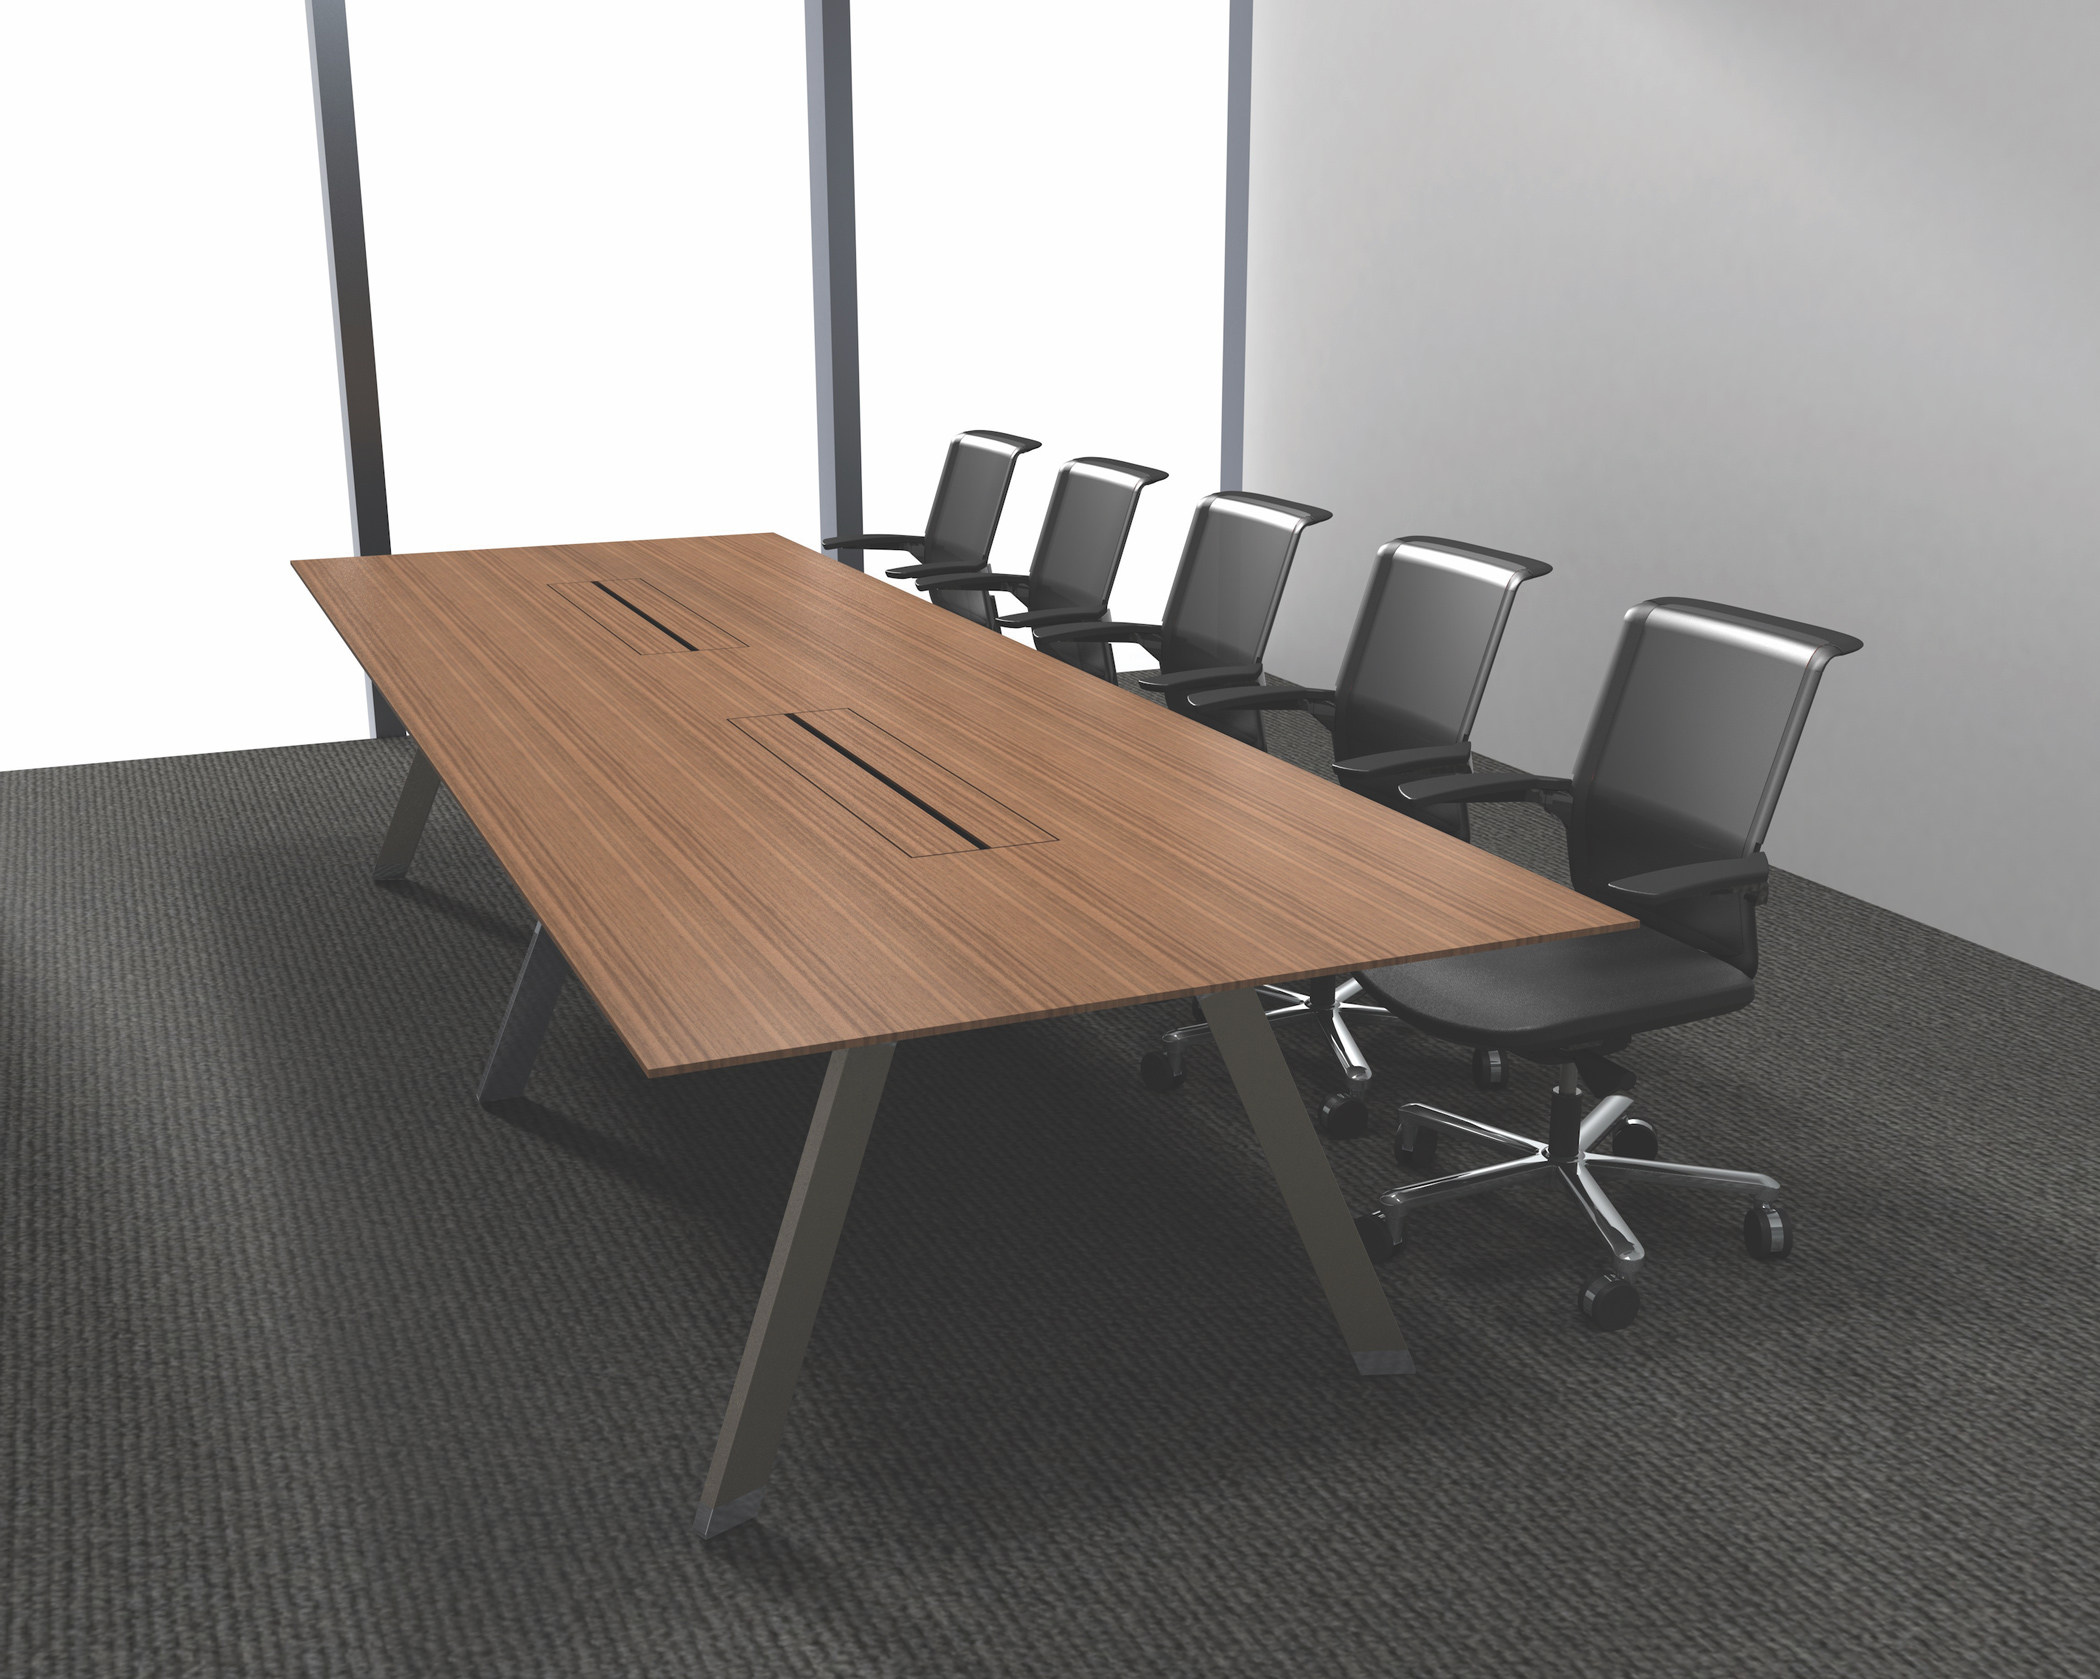 Wood-Paramount-Table extraordinary modern table for meetings and home offices